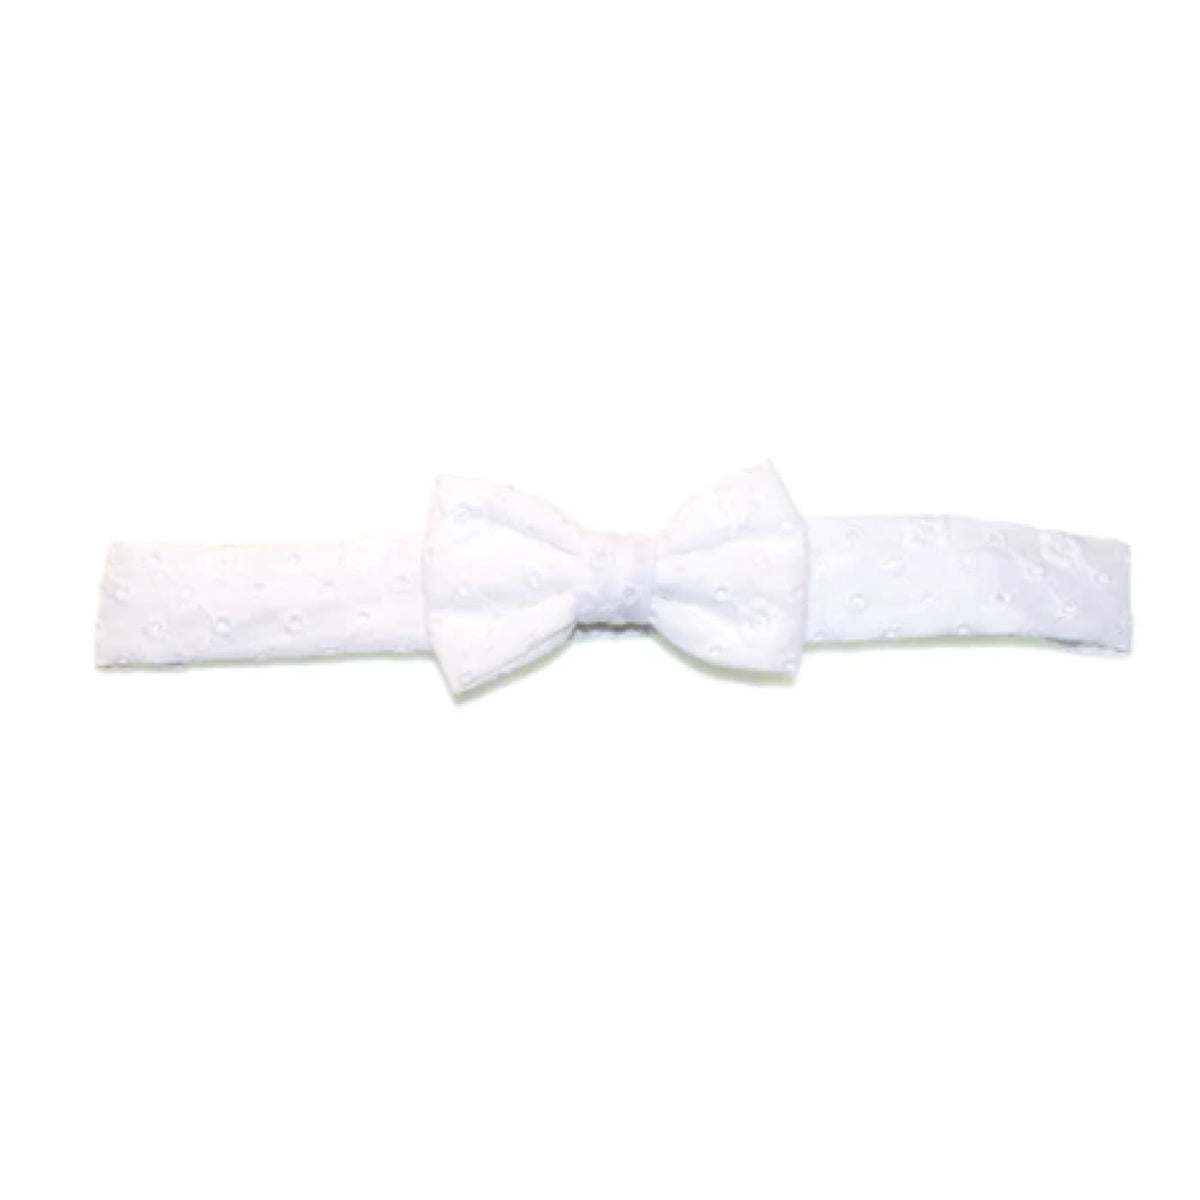 Goody Gumdrops Broderie Anglaise Baby Headband - White - White - BABY &amp; TODDLER CLOTHING - HEADBANDS/HAIR CLIPS